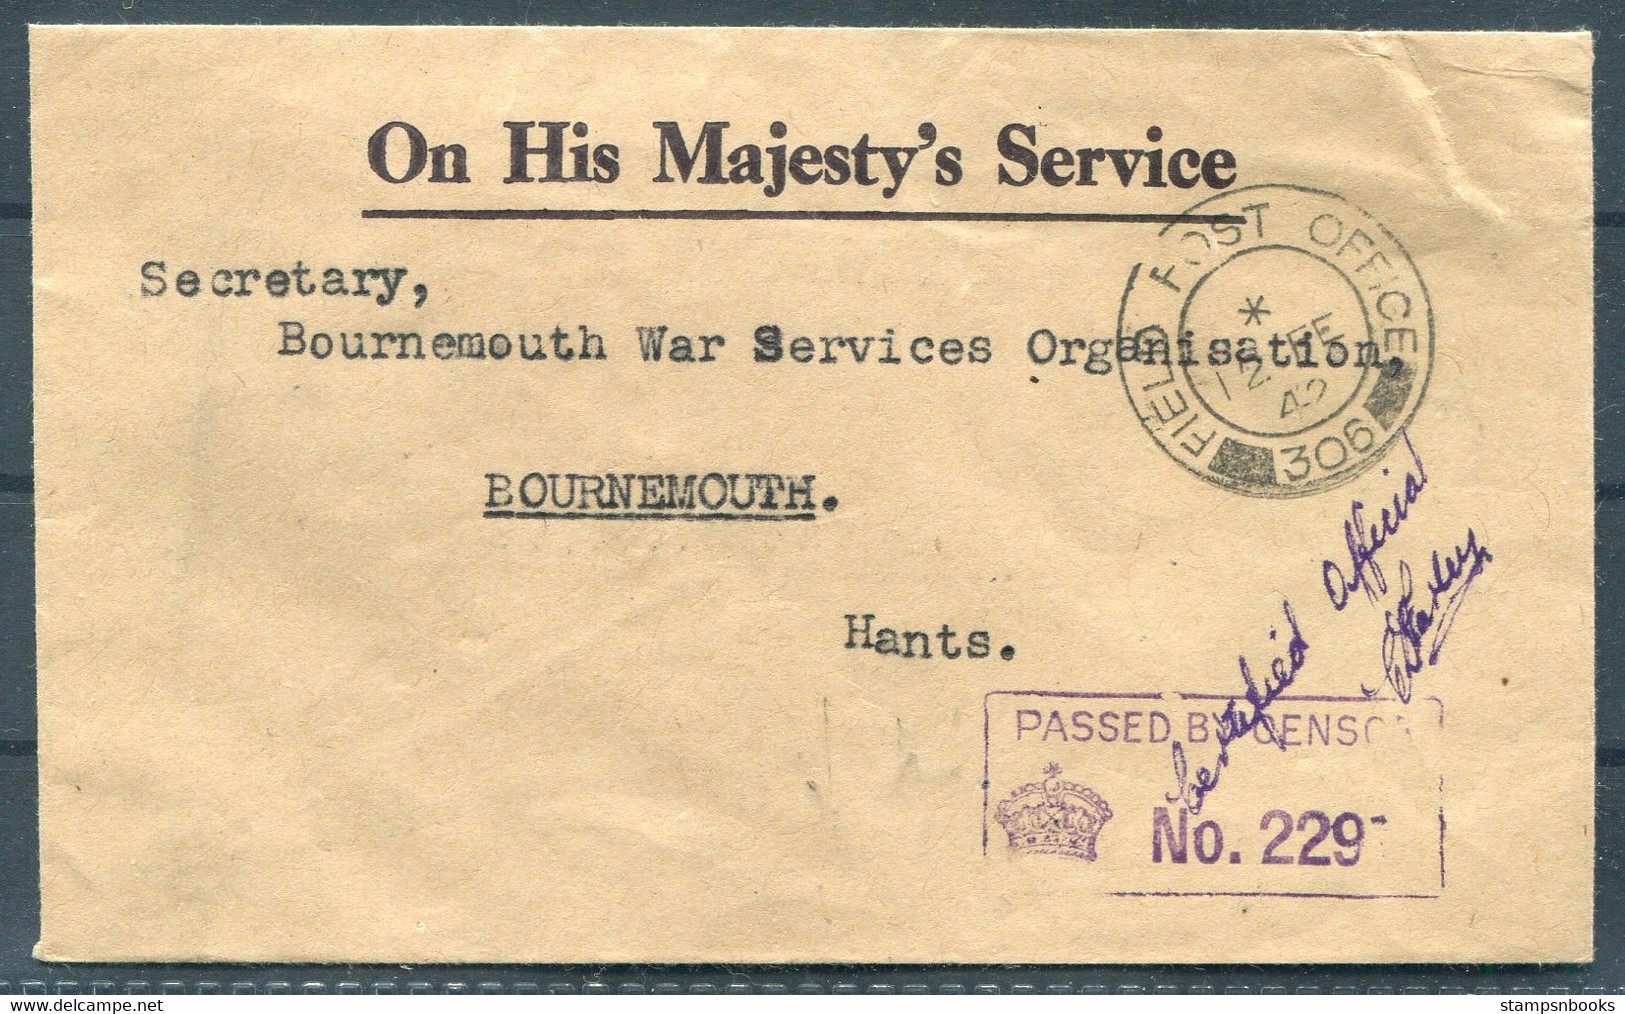 1942 Iceland Field Post Office FPO 306 O.H.M.S. "Certified Official" Censor Cover, Bournemouth War Service Organisation - Covers & Documents